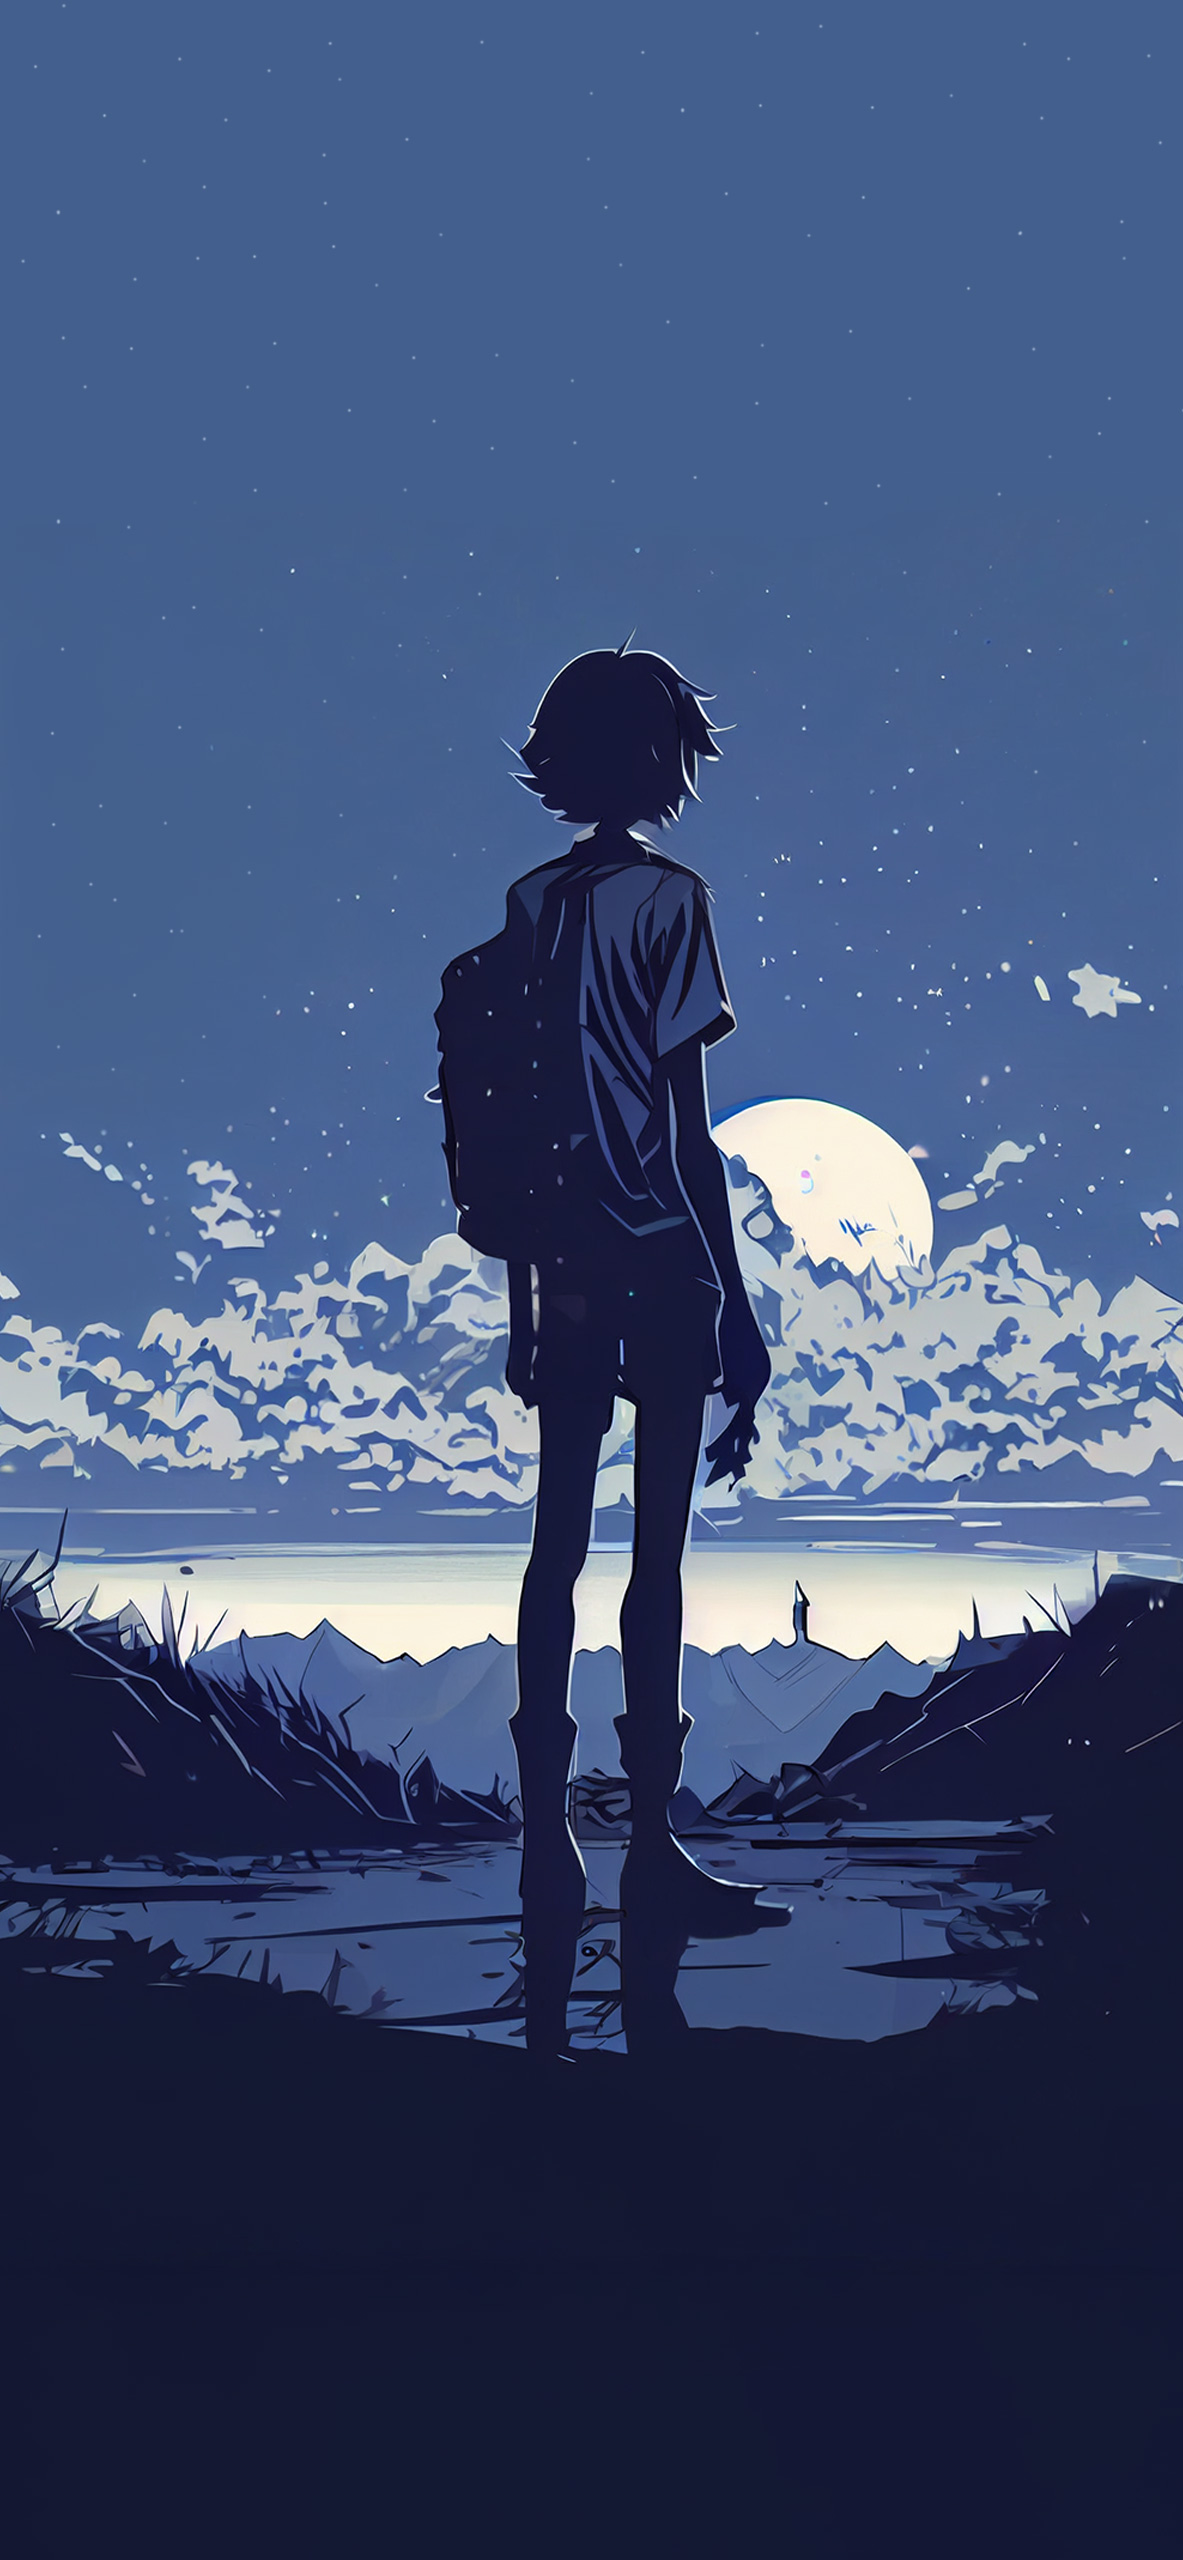 A person standing on the edge of water - Blue anime